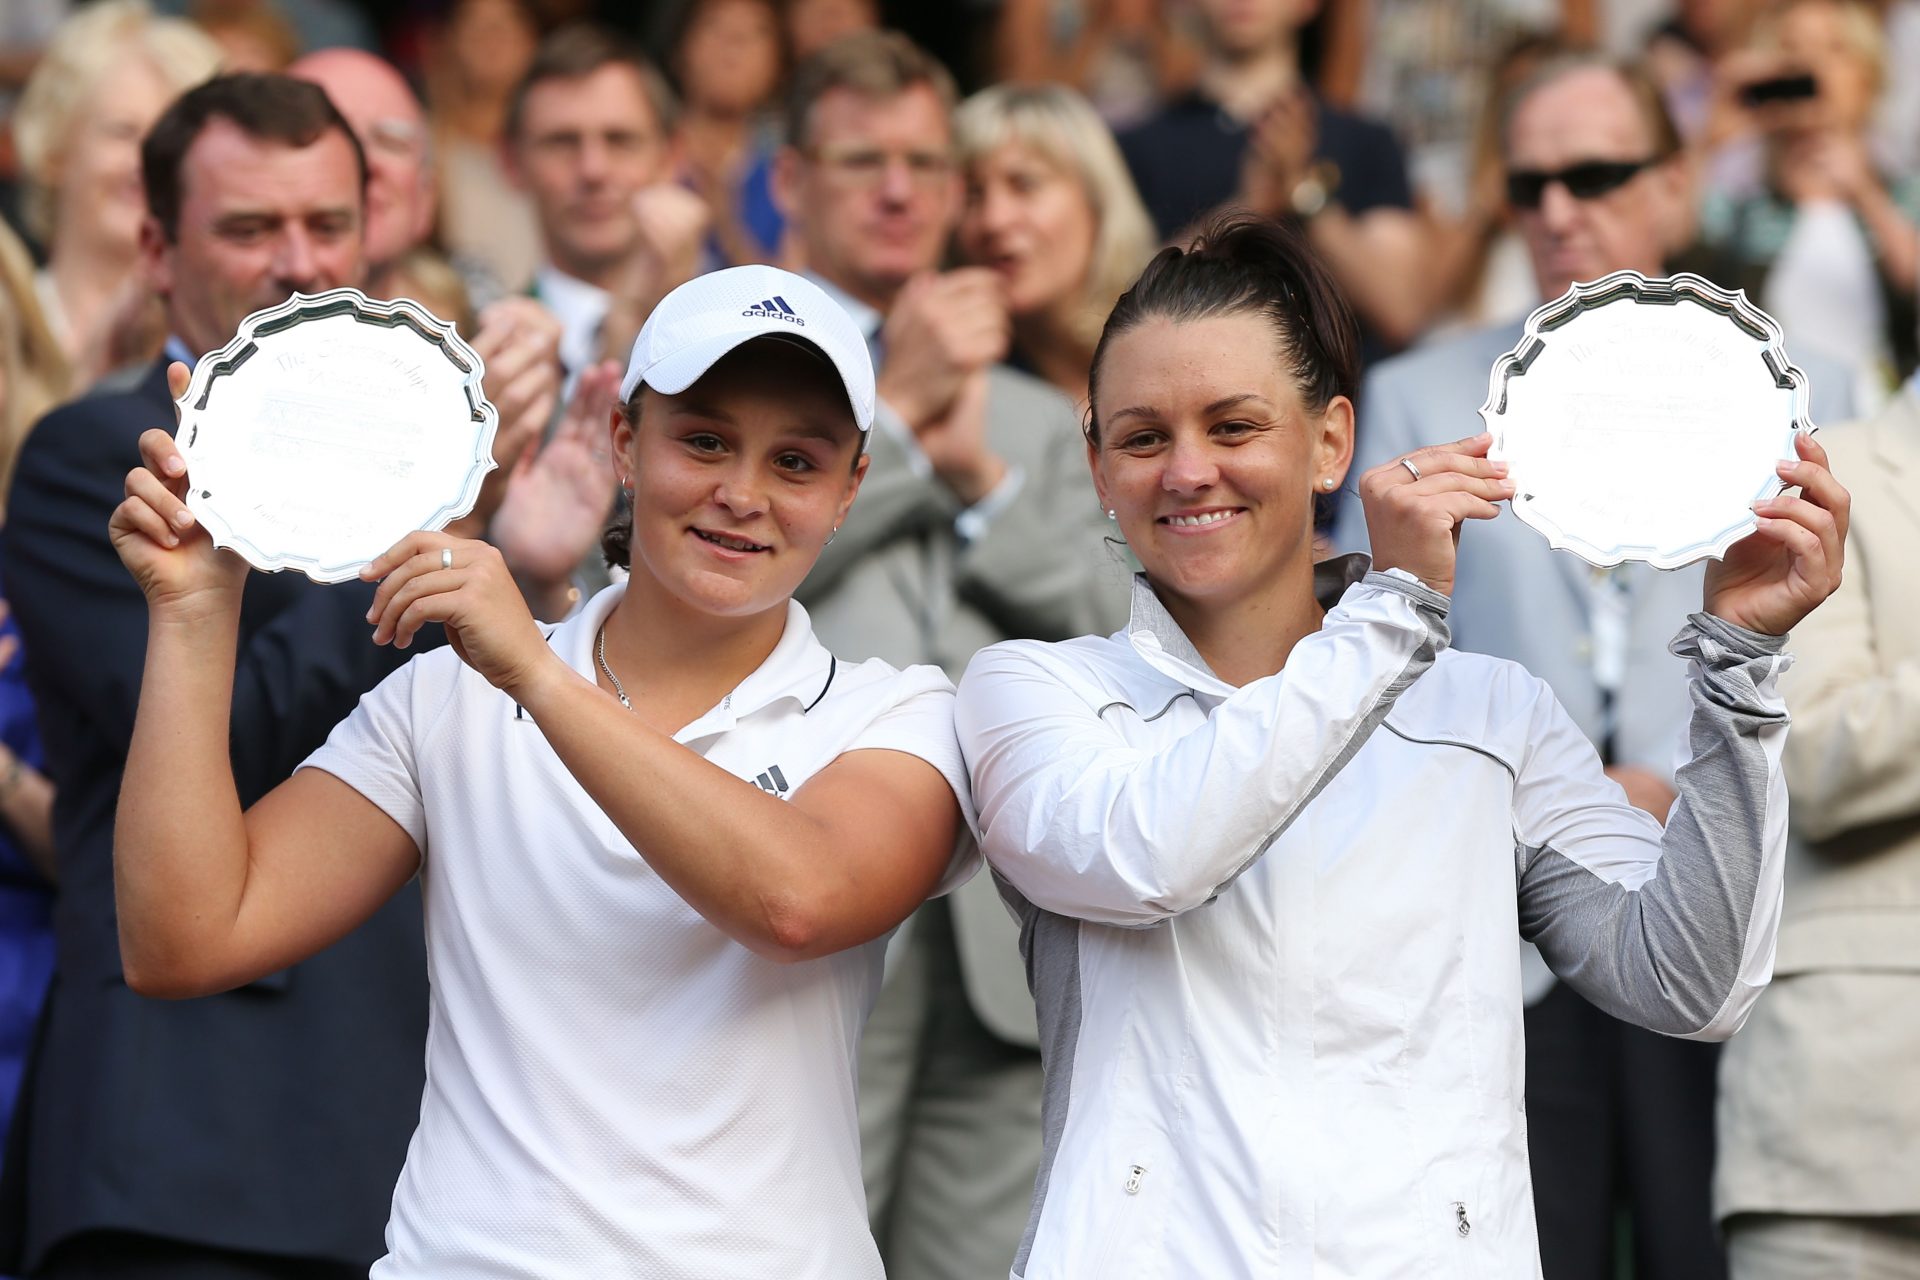 A Wimbledon final together in 2013